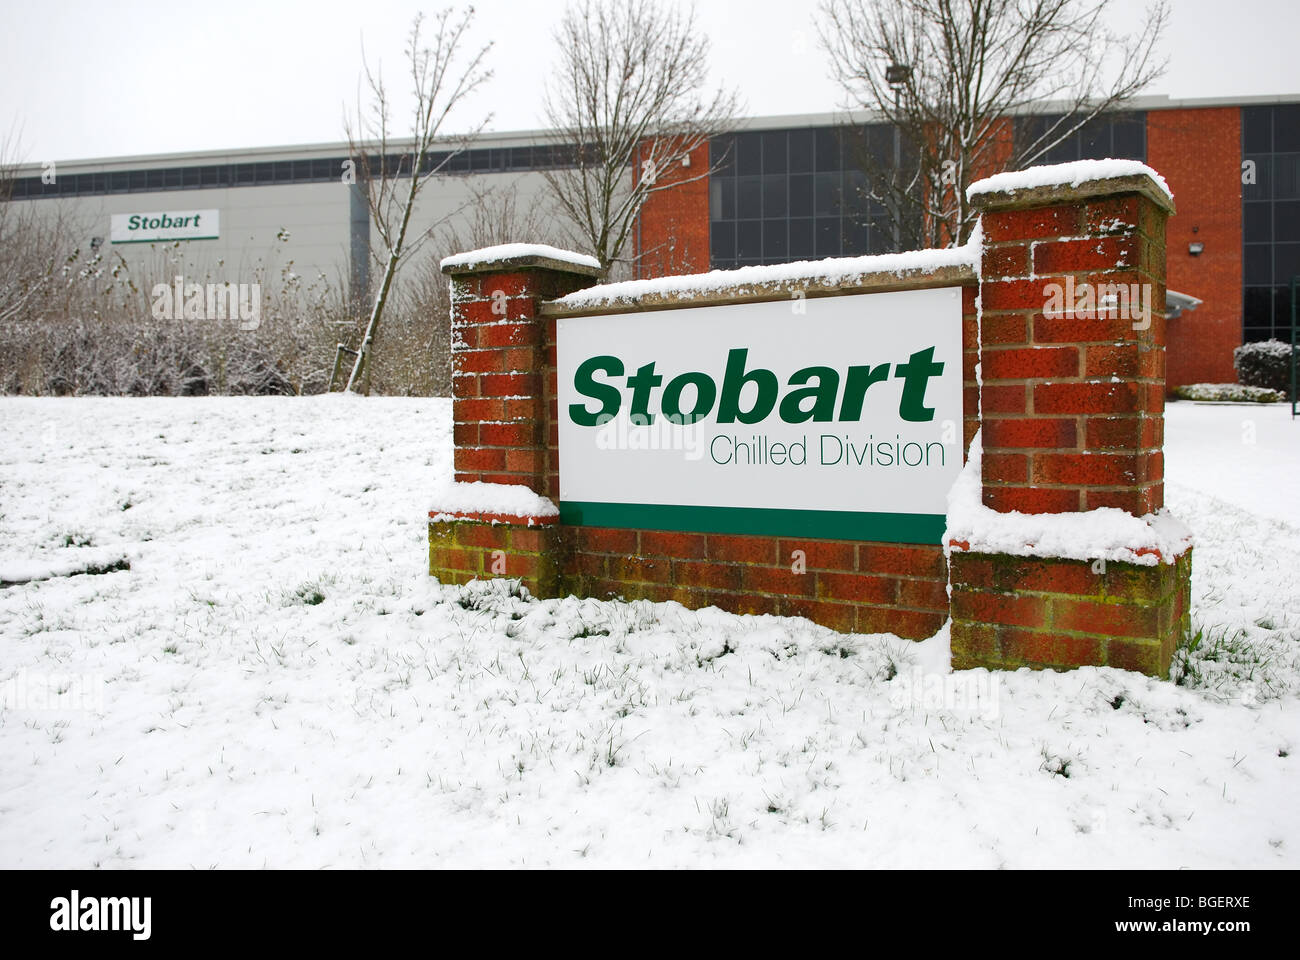 Stobart chilled division Warehouse. Stock Photo